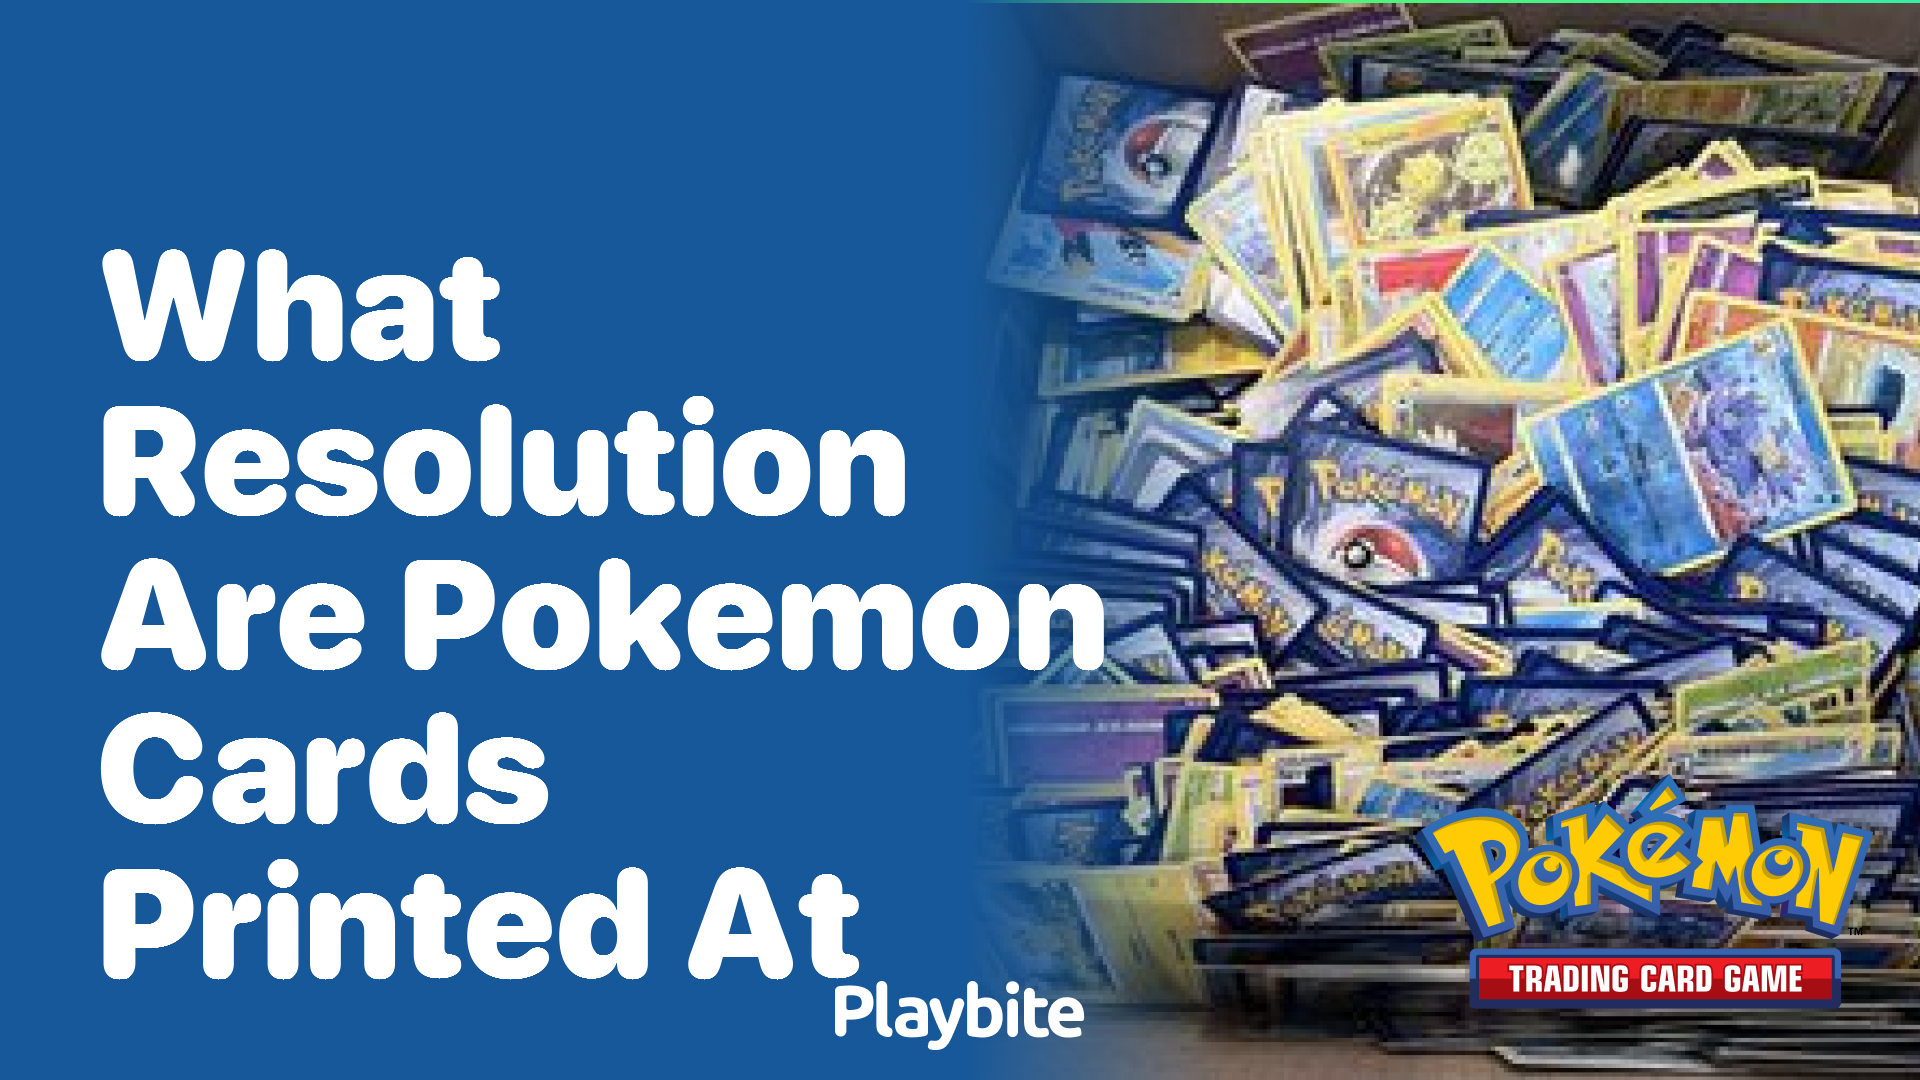 What Resolution are Pokemon Cards Printed At?